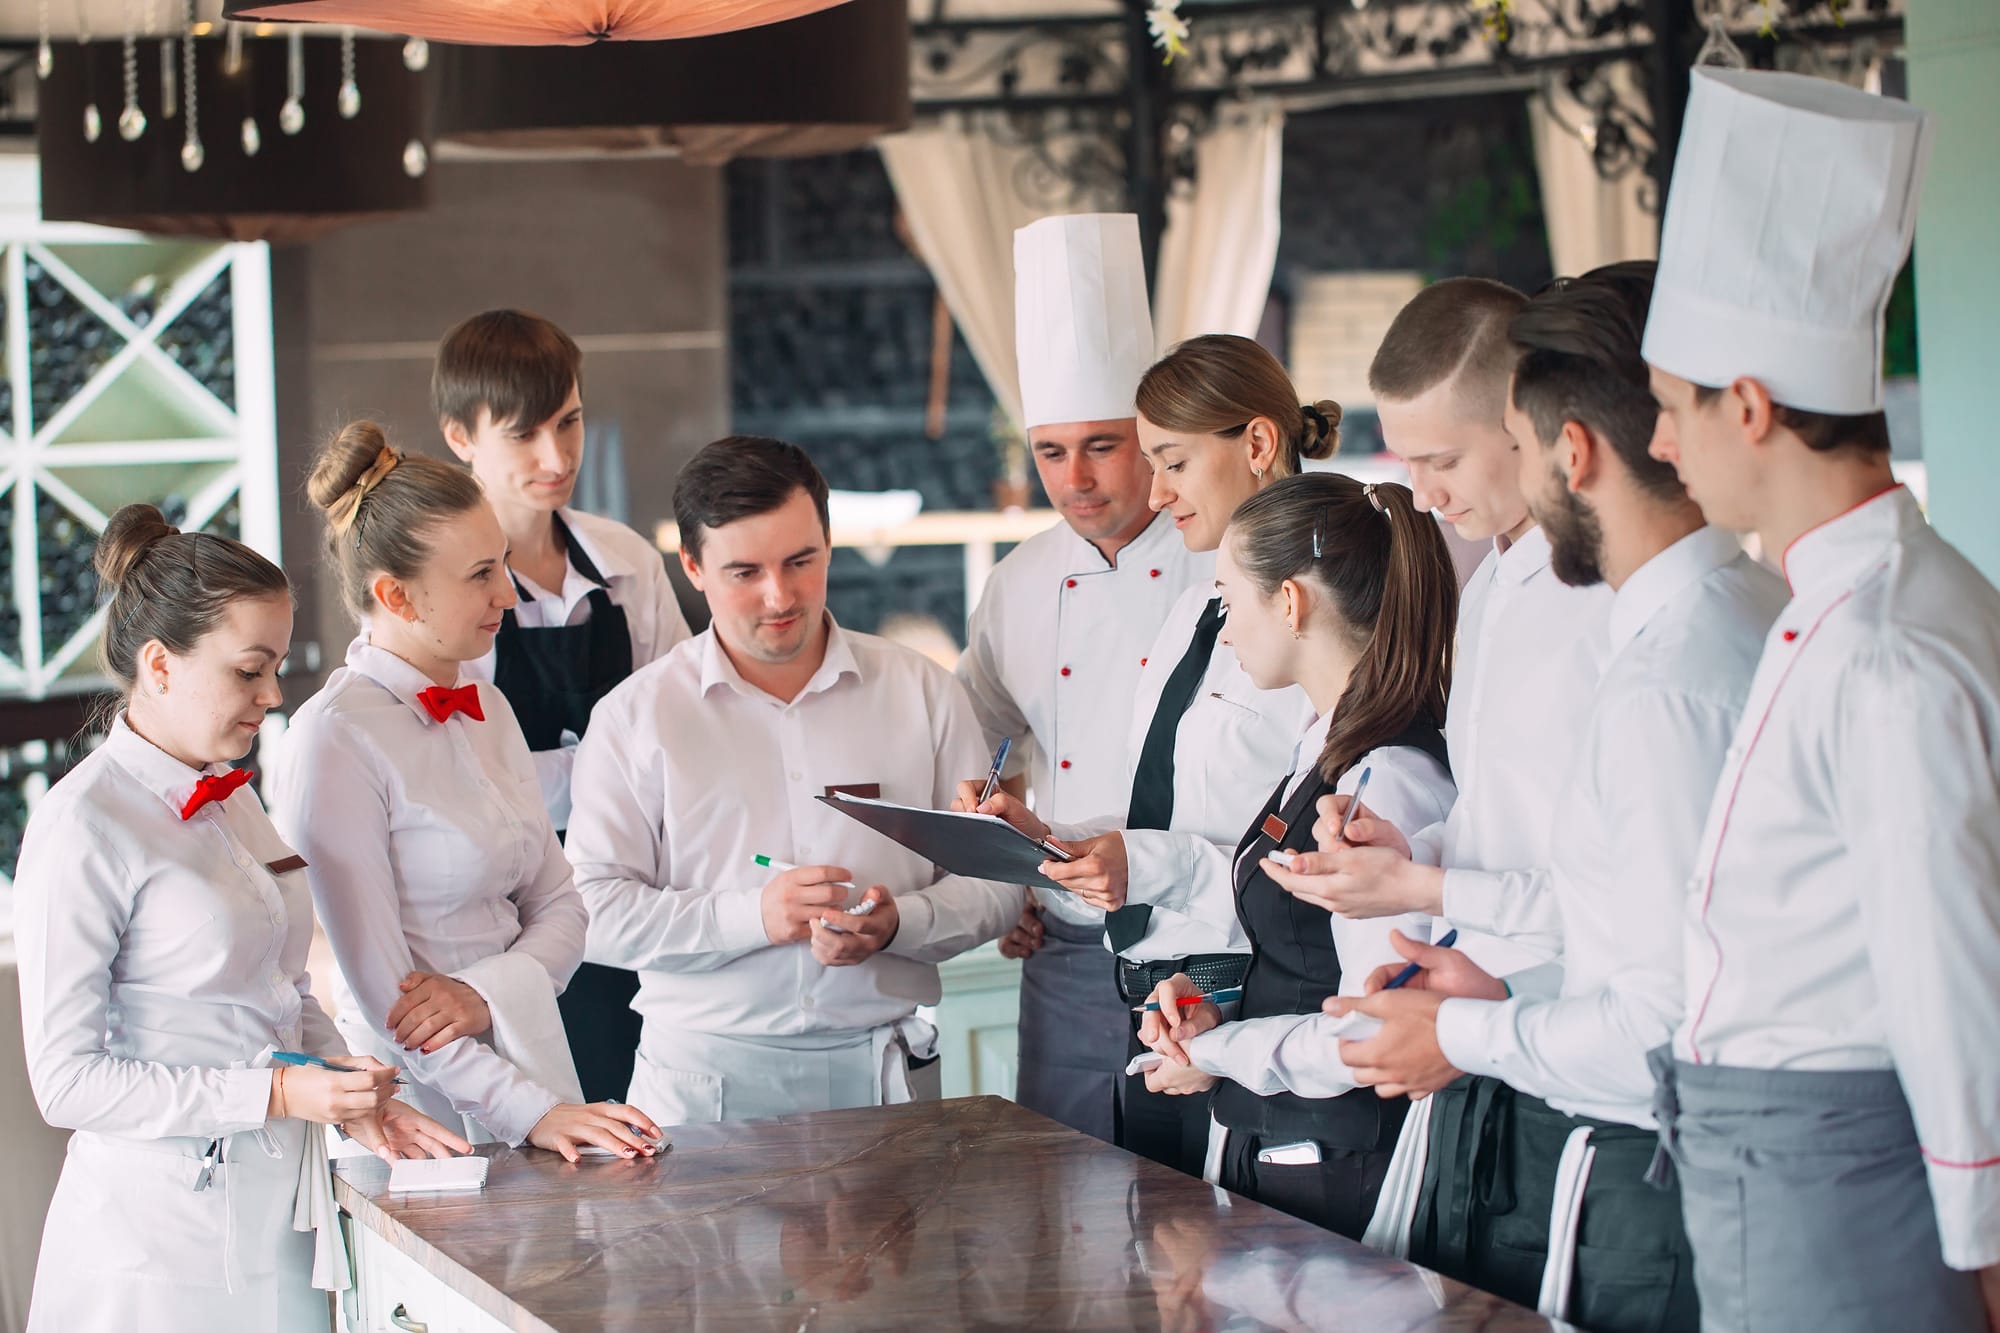 A group of restaurant severs and chefs standing around a manager.